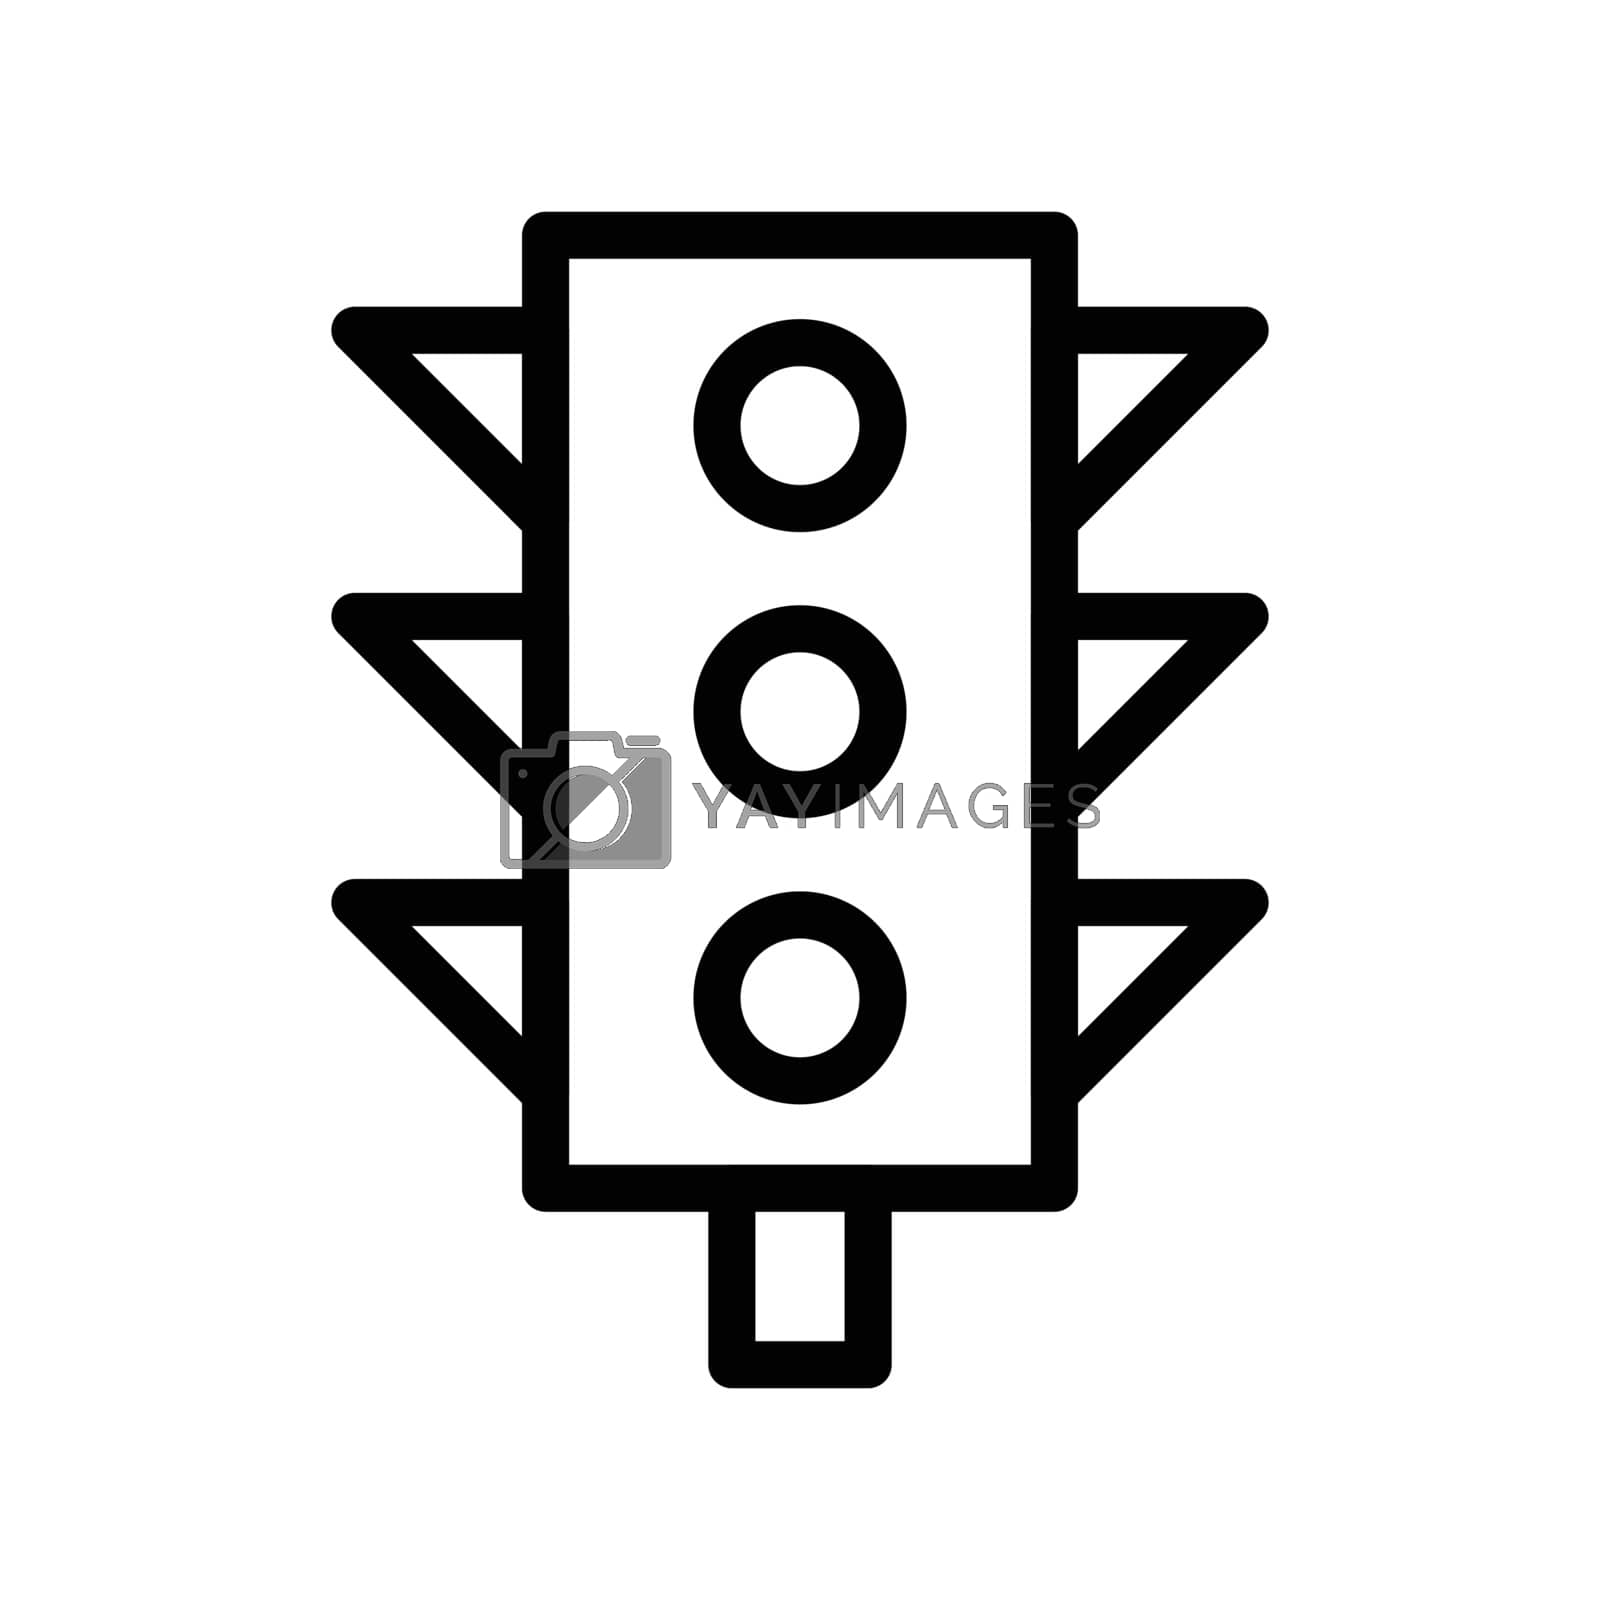 Royalty free image of traffic by vectorstall